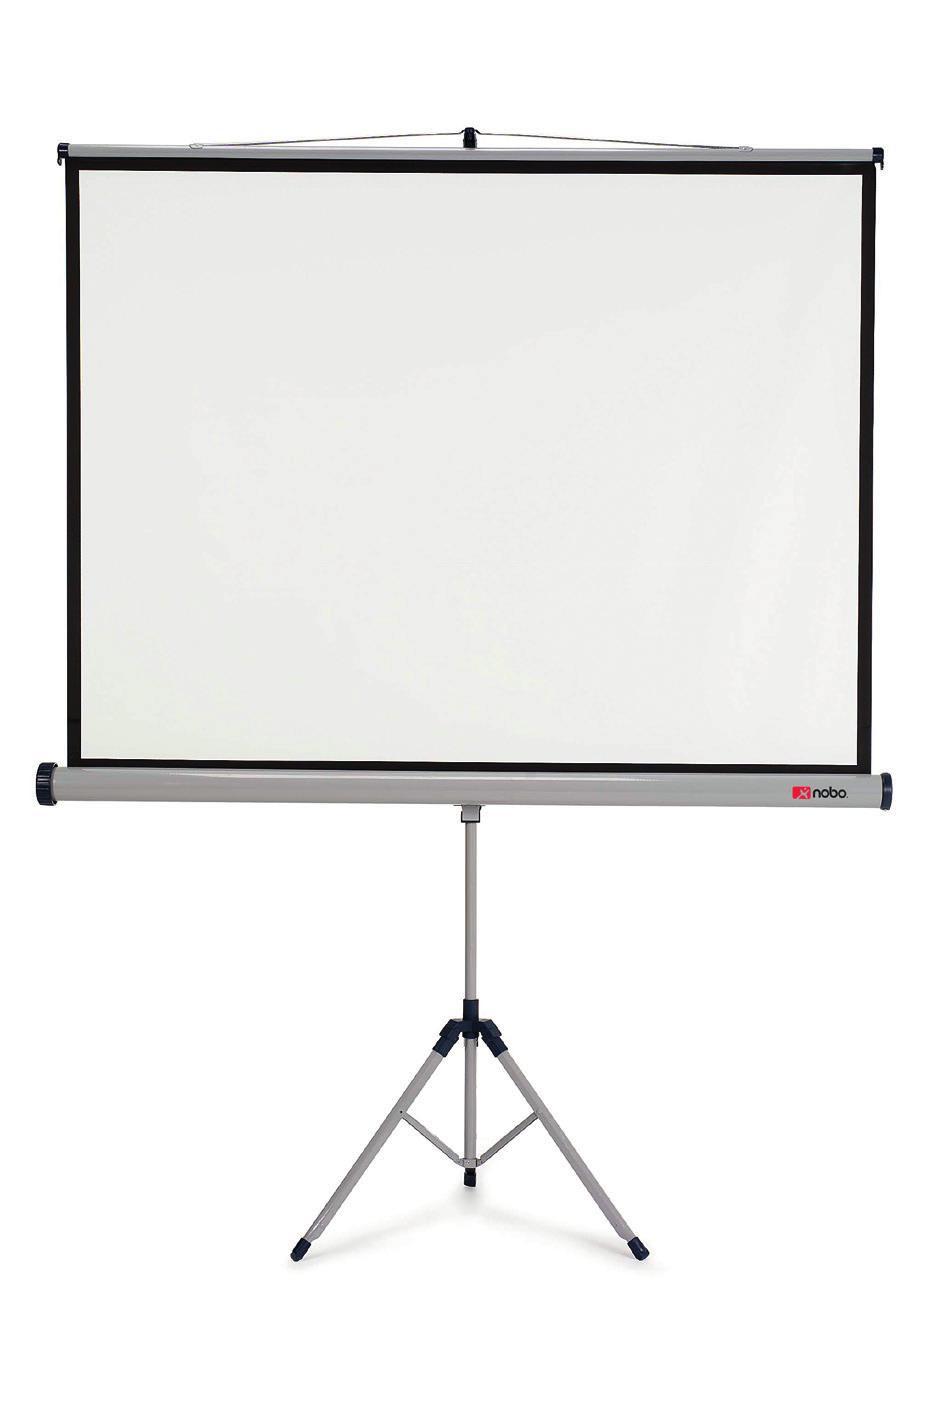 Screens and Pointers Nobo Projection Screens offer the ideal way for providing a sharp and detailed